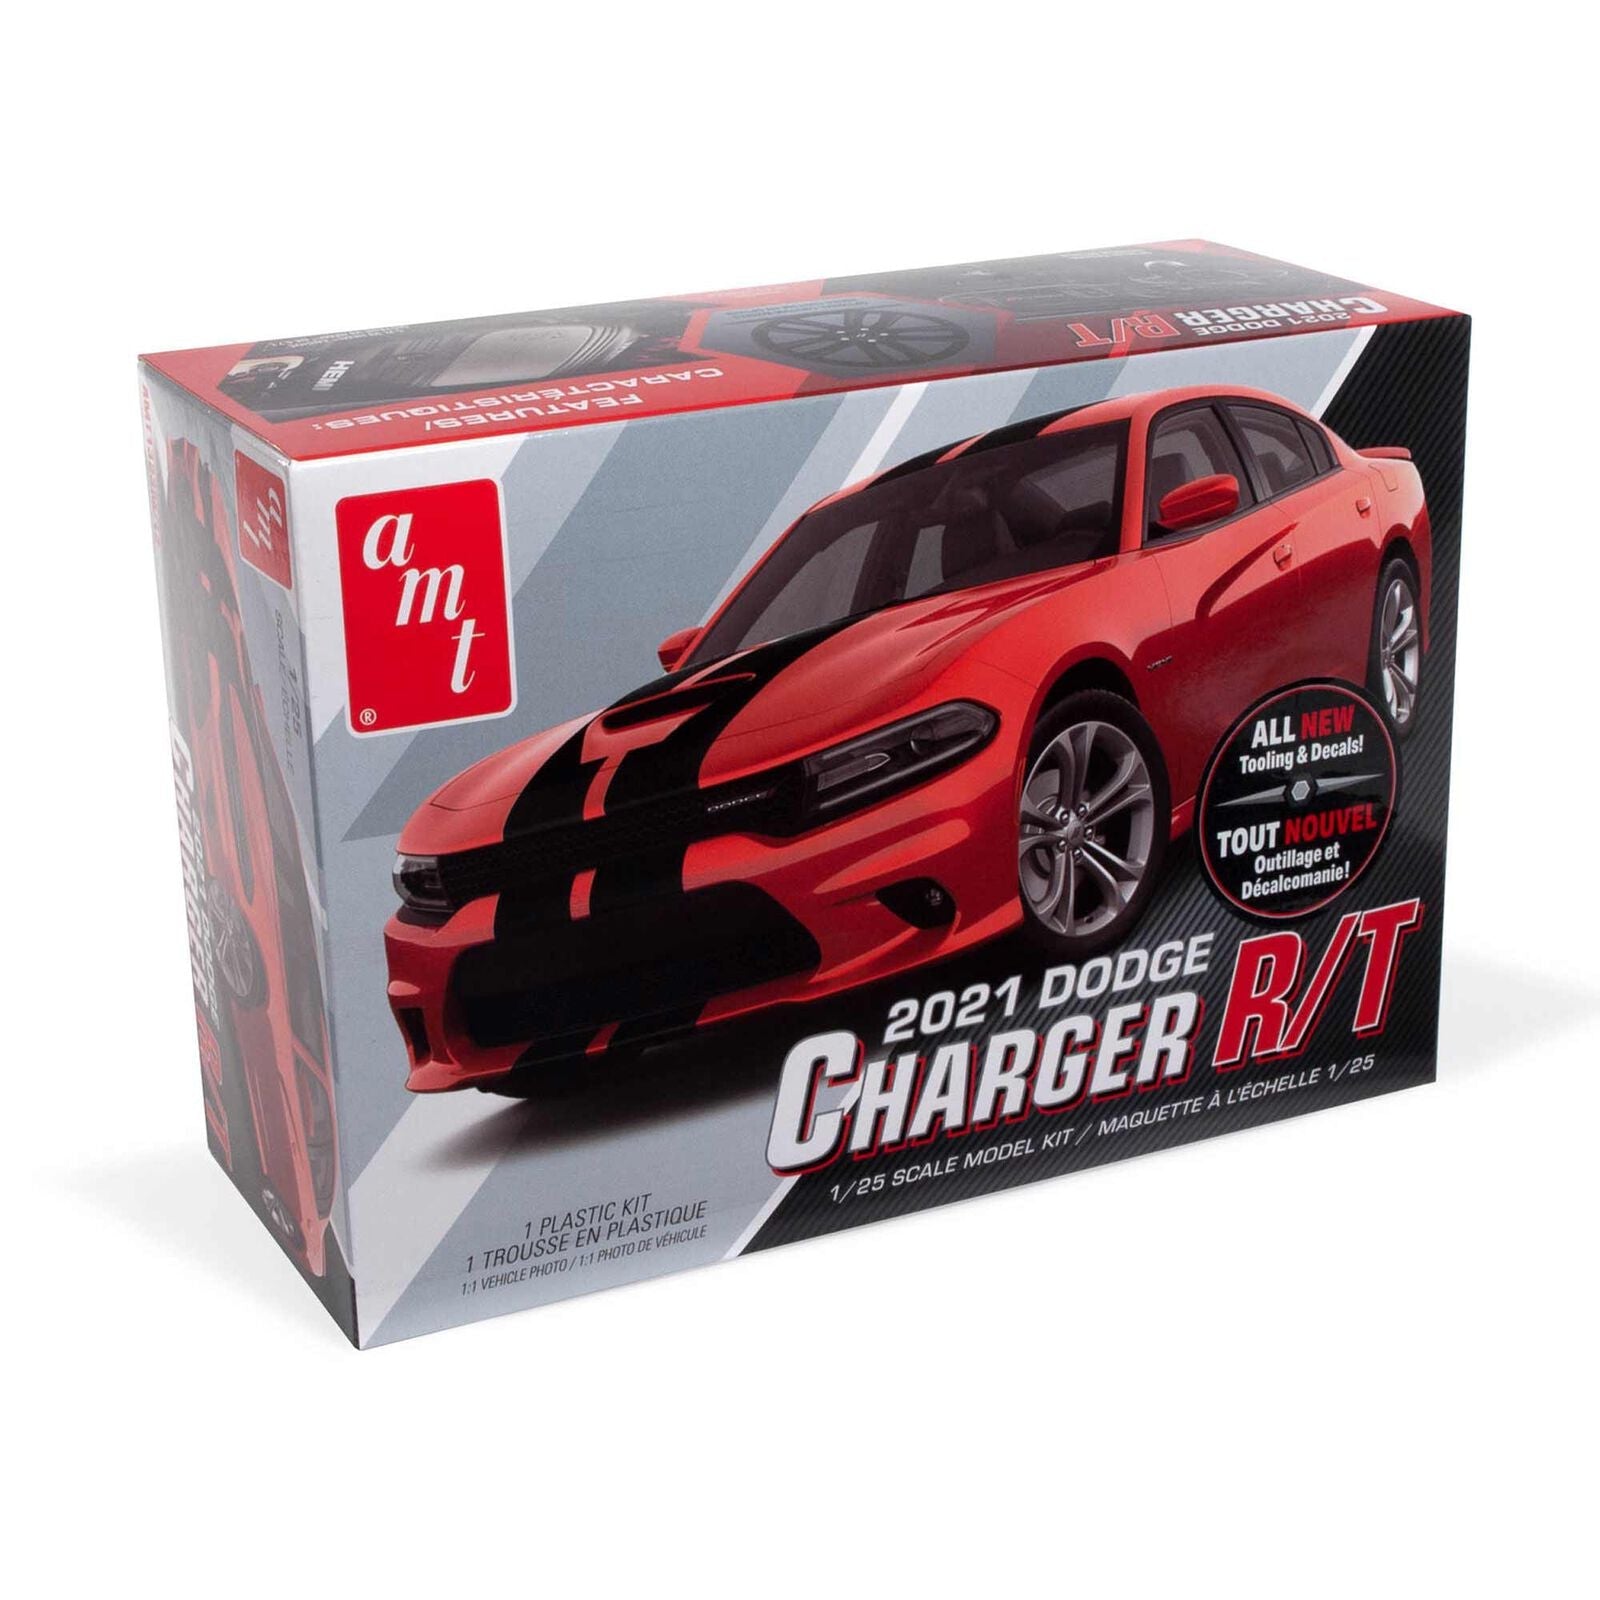 AMT 2021 Dodge Charger R/T Plastic Model Kit, 1/25 Scale